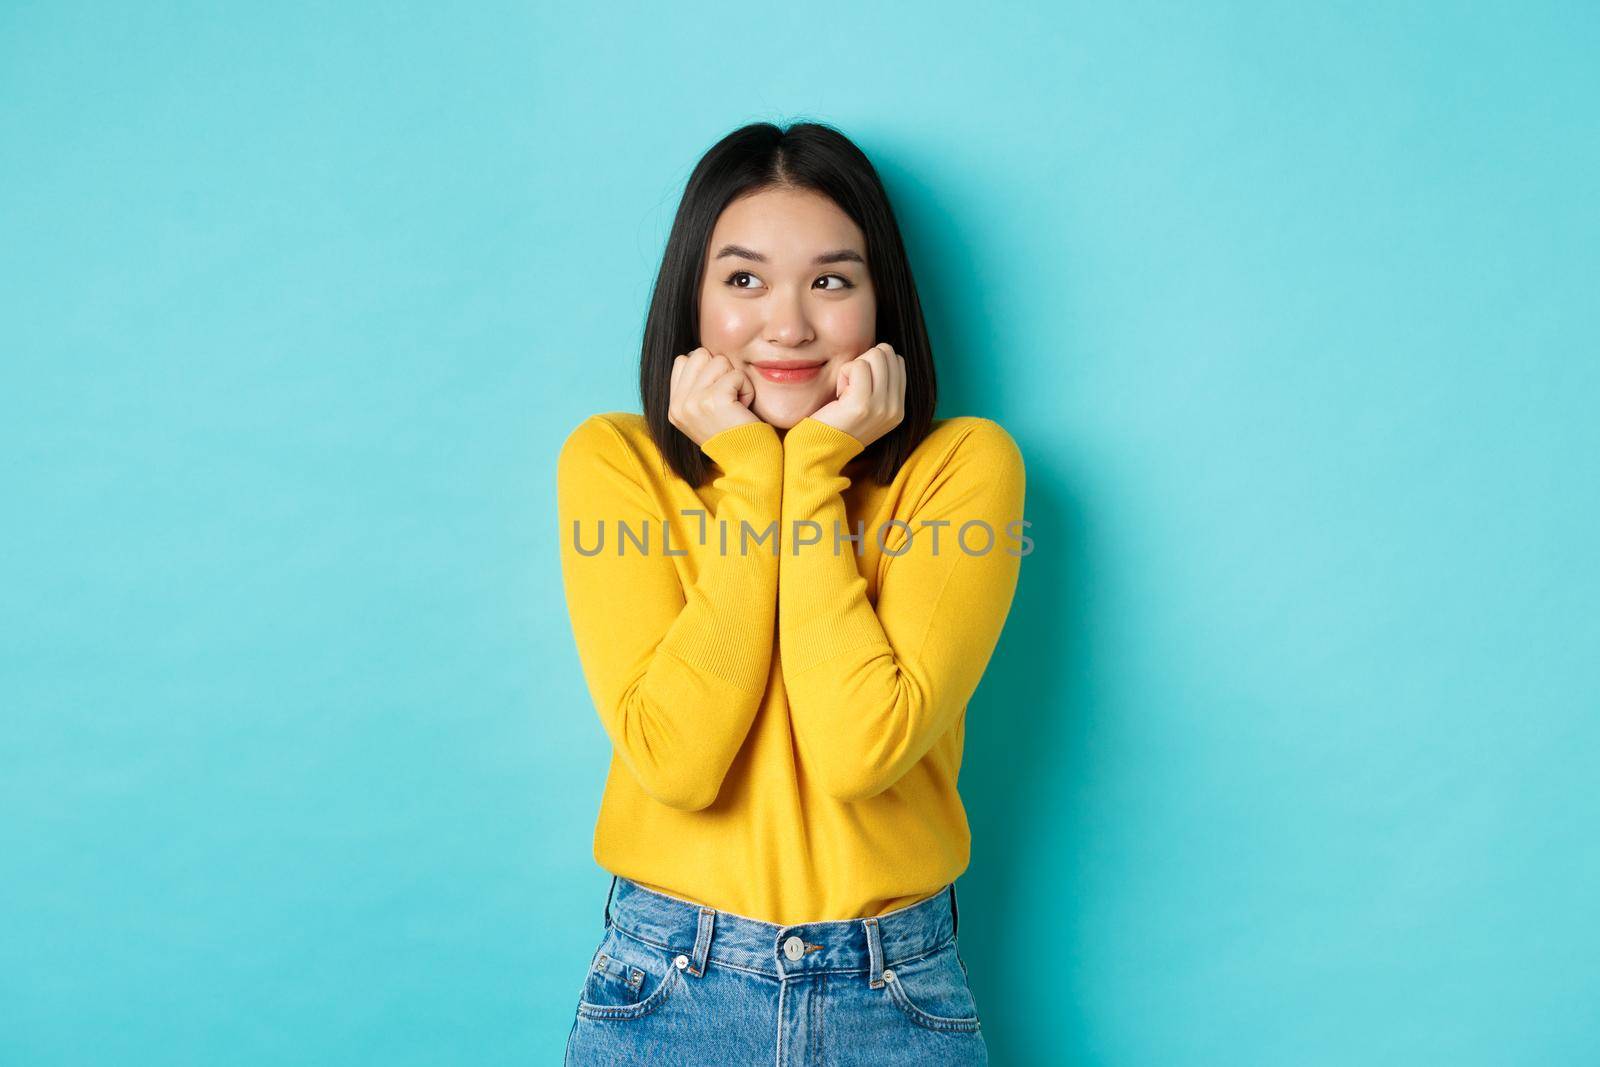 Beauty and fashion concept. Beautiful asian woman blushing and smiling, looking dreamy left, imaging something cute, standing against blue background.